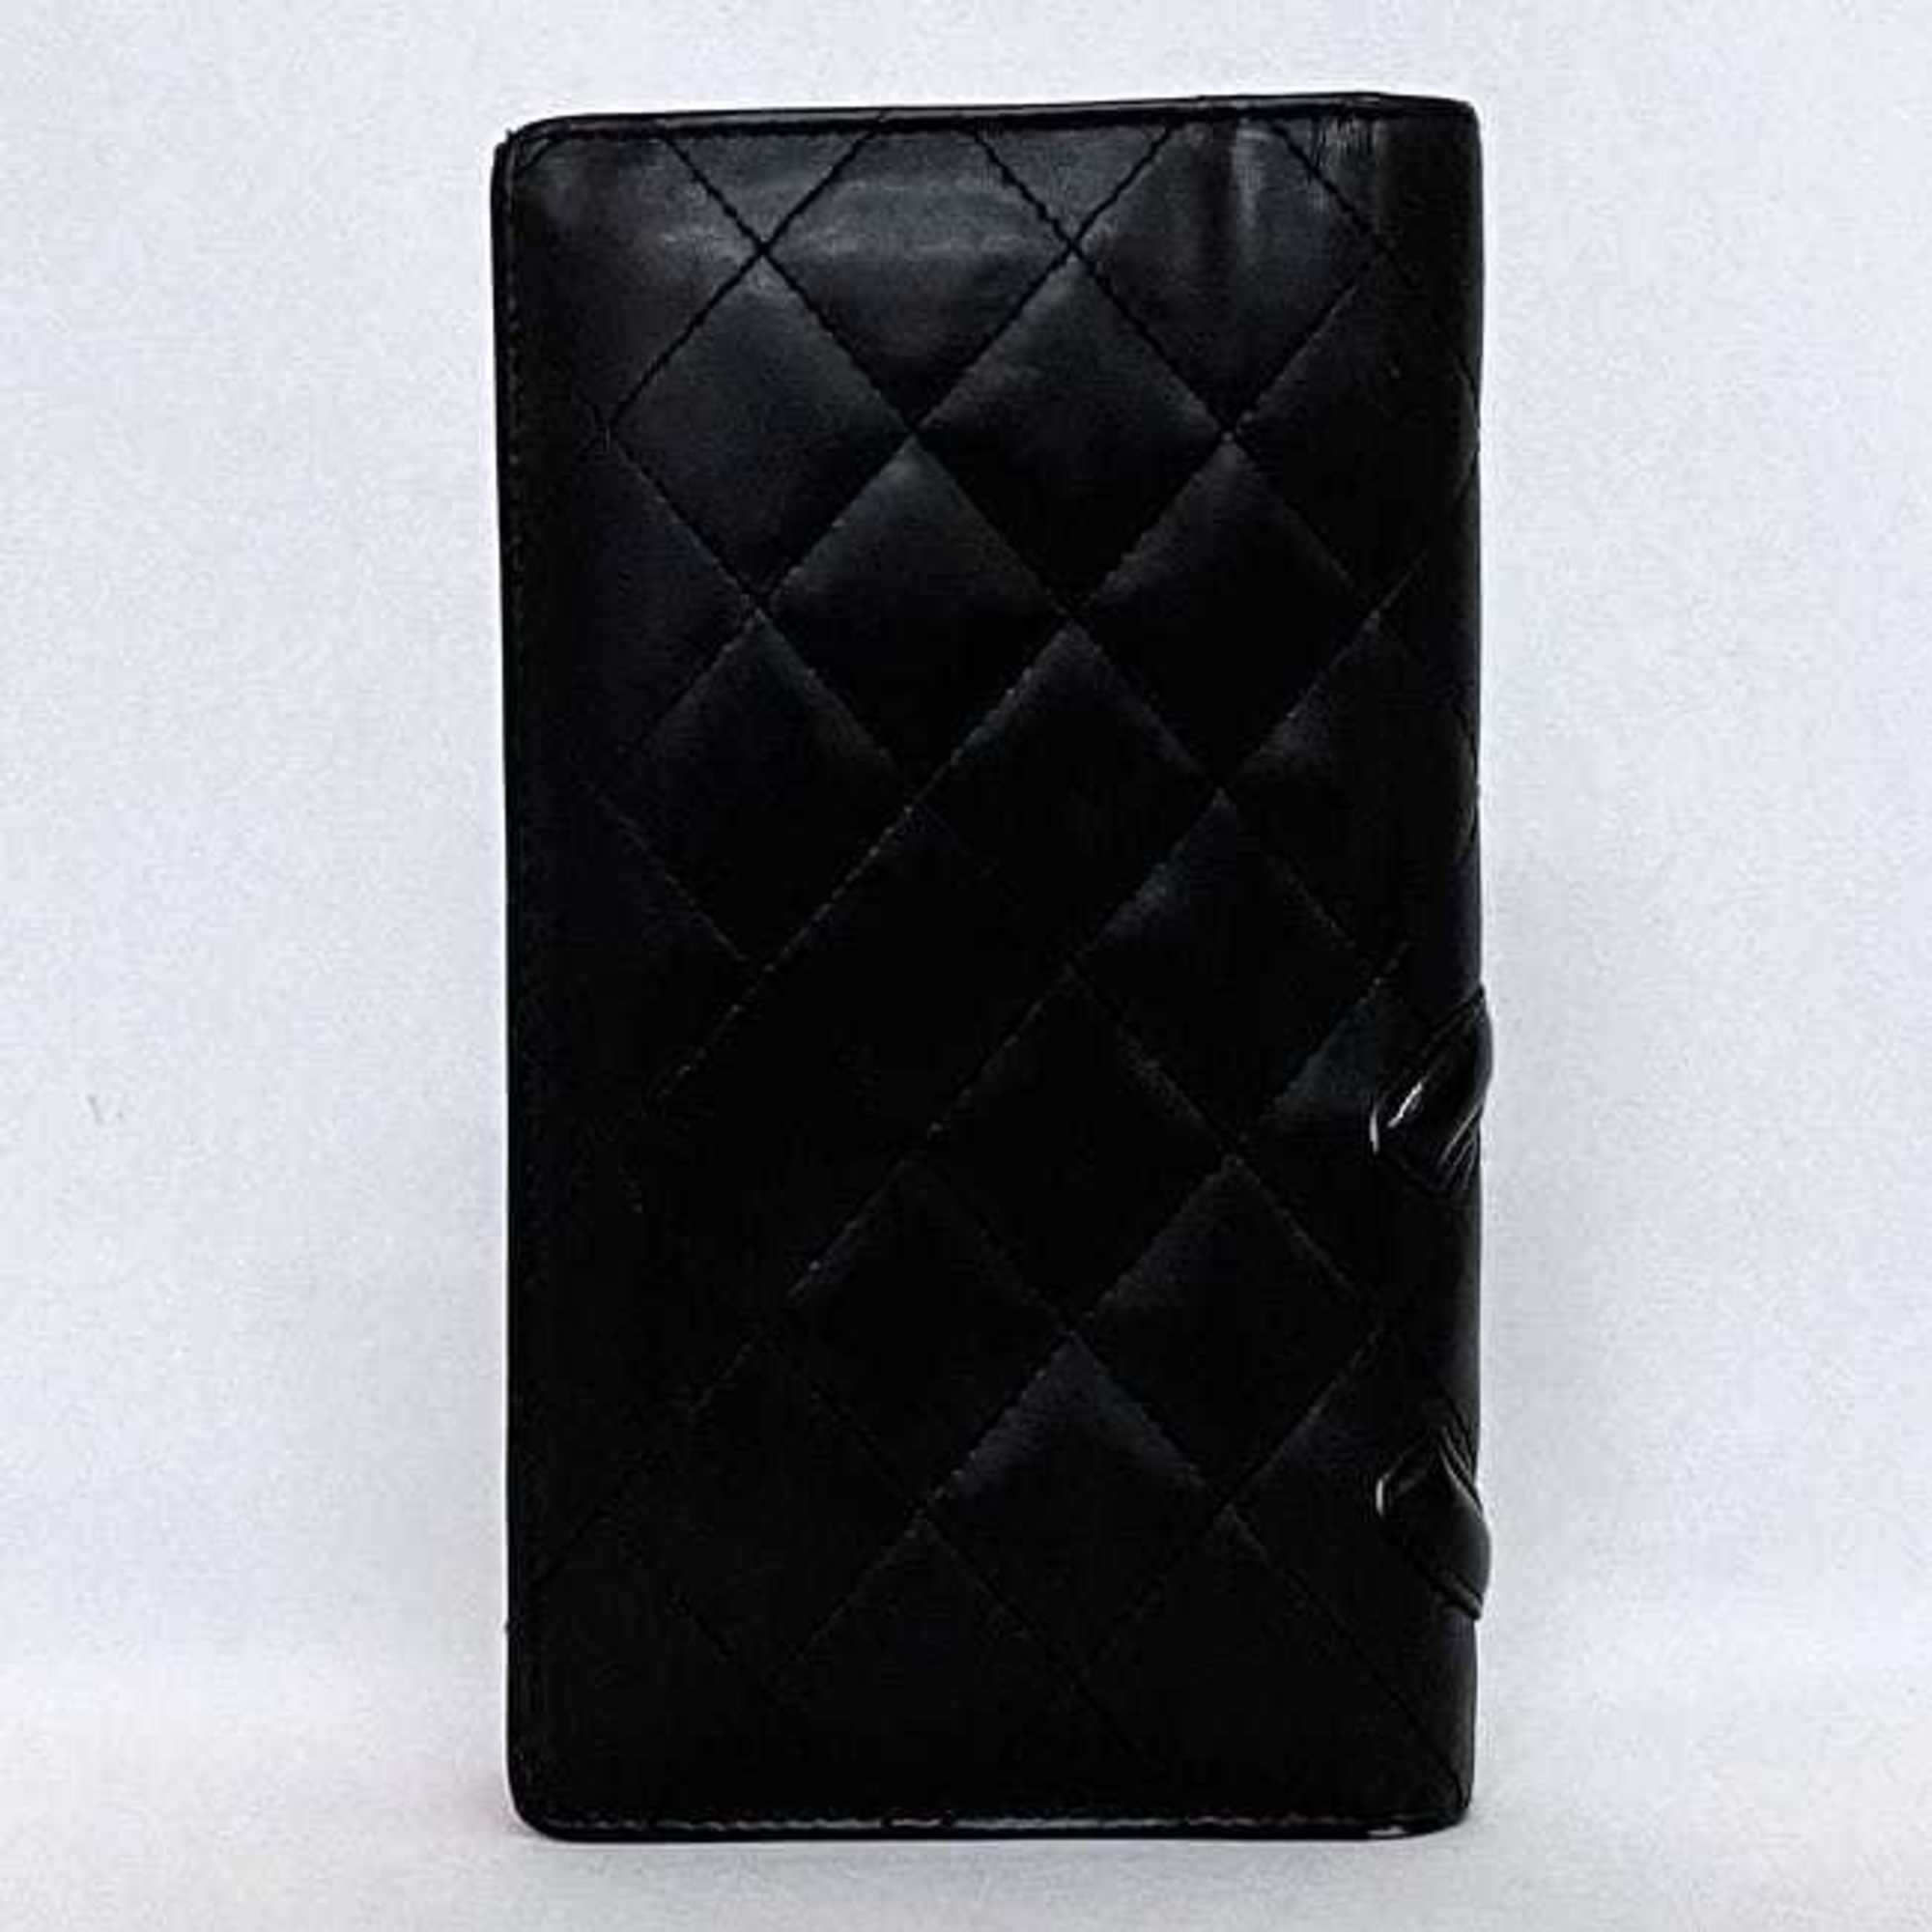 CHANEL Bifold Long Wallet Black Cambon A26717 Leather 13321037 Coco Mark Fold Quilted Matelasse Ladies